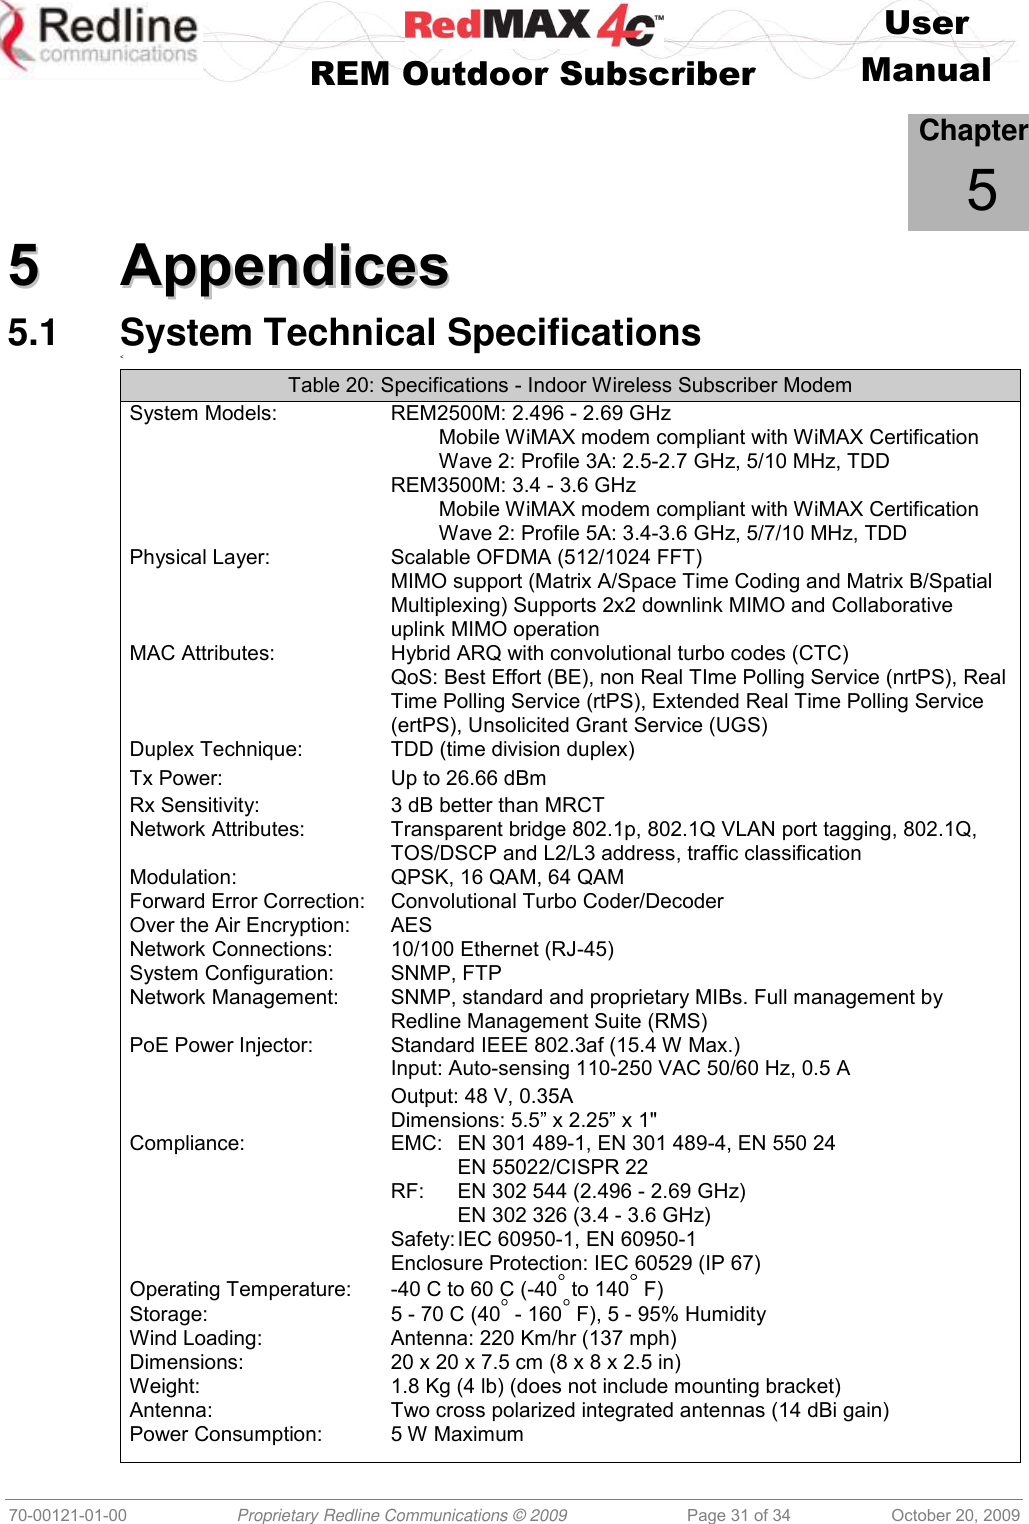    User   REM Outdoor Subscriber  Manual   70-00121-01-00 Proprietary Redline Communications © 2009 Page 31 of 34 October 20, 2009            Chapter 5 55  AAppppeennddiicceess  5.1  System Technical Specifications &lt; Table 20: Specifications - Indoor Wireless Subscriber Modem System Models:  REM2500M: 2.496 - 2.69 GHz     Mobile WiMAX modem compliant with WiMAX Certification     Wave 2: Profile 3A: 2.5-2.7 GHz, 5/10 MHz, TDD   REM3500M: 3.4 - 3.6 GHz     Mobile WiMAX modem compliant with WiMAX Certification     Wave 2: Profile 5A: 3.4-3.6 GHz, 5/7/10 MHz, TDD Physical Layer:  Scalable OFDMA (512/1024 FFT)   MIMO support (Matrix A/Space Time Coding and Matrix B/Spatial Multiplexing) Supports 2x2 downlink MIMO and Collaborative uplink MIMO operation MAC Attributes:  Hybrid ARQ with convolutional turbo codes (CTC)   QoS: Best Effort (BE), non Real TIme Polling Service (nrtPS), Real Time Polling Service (rtPS), Extended Real Time Polling Service (ertPS), Unsolicited Grant Service (UGS) Duplex Technique:  TDD (time division duplex) Tx Power:  Up to 26.66 dBmRx Sensitivity:  3 dB better than MRCT Network Attributes:  Transparent bridge 802.1p, 802.1Q VLAN port tagging, 802.1Q, TOS/DSCP and L2/L3 address, traffic classification Modulation:  QPSK, 16 QAM, 64 QAM Forward Error Correction:  Convolutional Turbo Coder/Decoder Over the Air Encryption:  AES Network Connections:  10/100 Ethernet (RJ-45) System Configuration:  SNMP, FTP Network Management:  SNMP, standard and proprietary MIBs. Full management by Redline Management Suite (RMS) PoE Power Injector:  Standard IEEE 802.3af (15.4 W Max.)   Input: Auto-sensing 110-250 VAC 50/60 Hz, 0.5 A     Output: 48 V, 0.35A  Dimensions: 5.5” x 2.25” x 1&quot; Compliance:  EMC:  EN 301 489-1, EN 301 489-4, EN 550 24     EN 55022/CISPR 22   RF:  EN 302 544 (2.496 - 2.69 GHz)     EN 302 326 (3.4 - 3.6 GHz)   Safety: IEC 60950-1, EN 60950-1   Enclosure Protection: IEC 60529 (IP 67) Operating Temperature:  -40 C to 60 C (-40  to 140  F) Storage:  5 - 70 C (40  - 160  F), 5 - 95% Humidity  Wind Loading:  Antenna: 220 Km/hr (137 mph) Dimensions:   20 x 20 x 7.5 cm (8 x 8 x 2.5 in) Weight:  1.8 Kg (4 lb) (does not include mounting bracket) Antenna:  Two cross polarized integrated antennas (14 dBi gain) Power Consumption:  5 W Maximum  